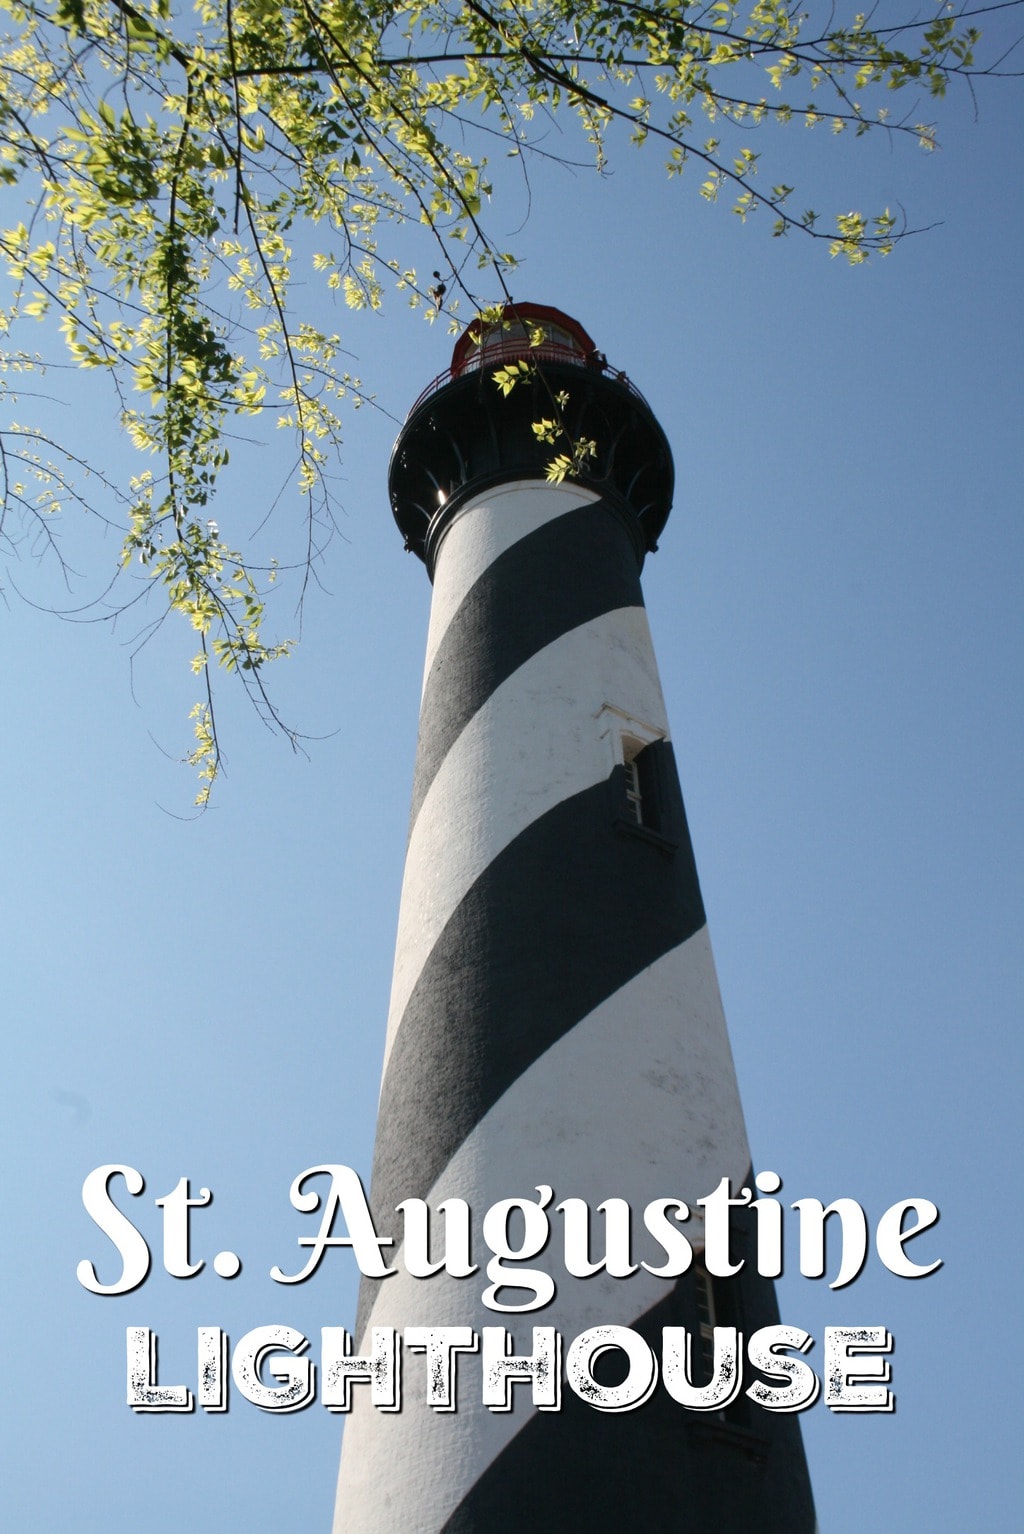 I love happy endings, and the St. Augustine Lighthouse in St. Augustine, Florida, certainly has one.